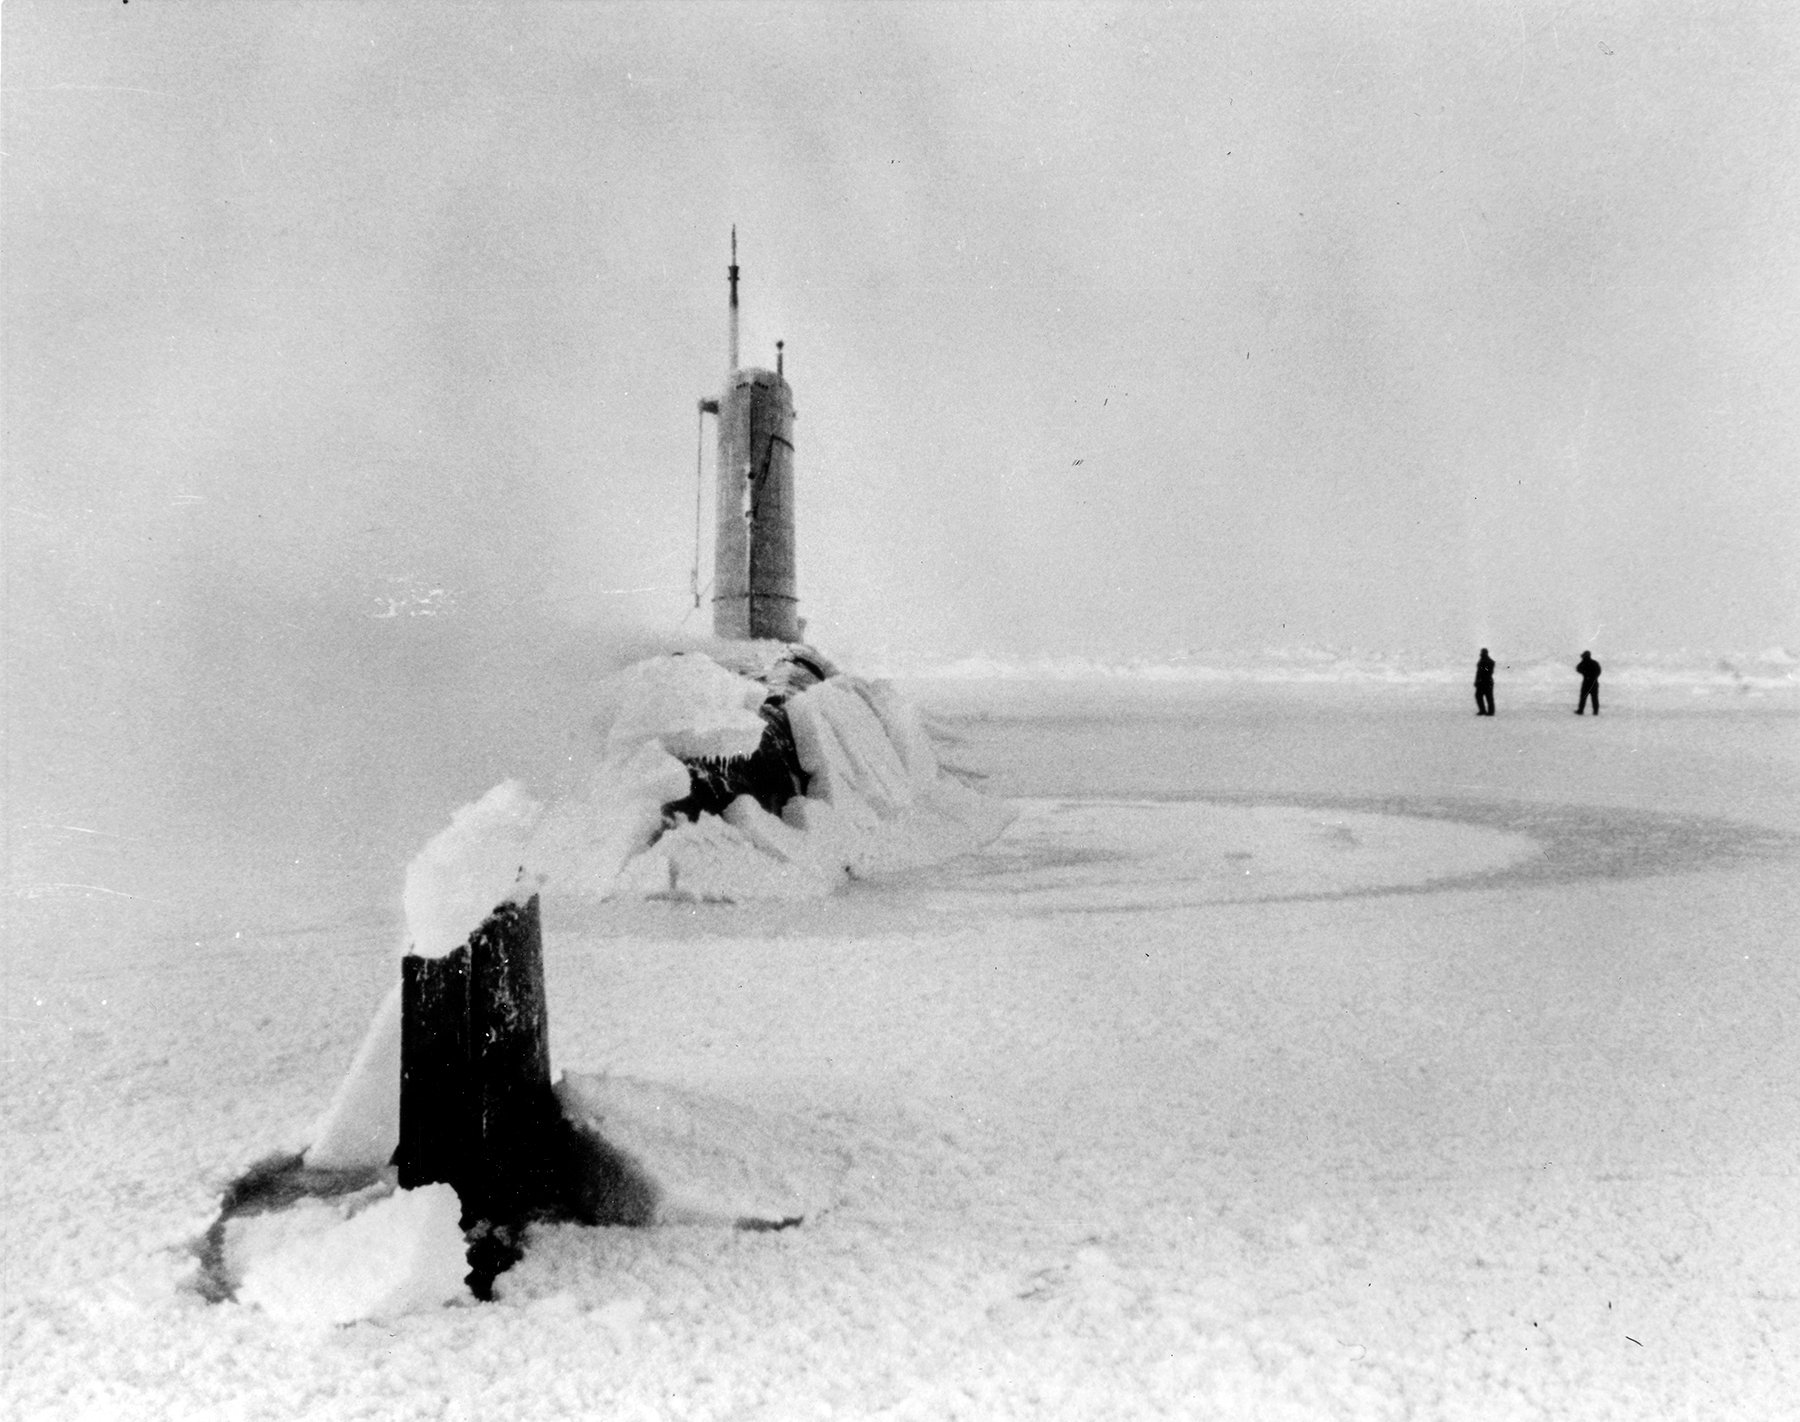 Tail view of USS Skate (SSN-578) surface through the polar ice in March 1959.